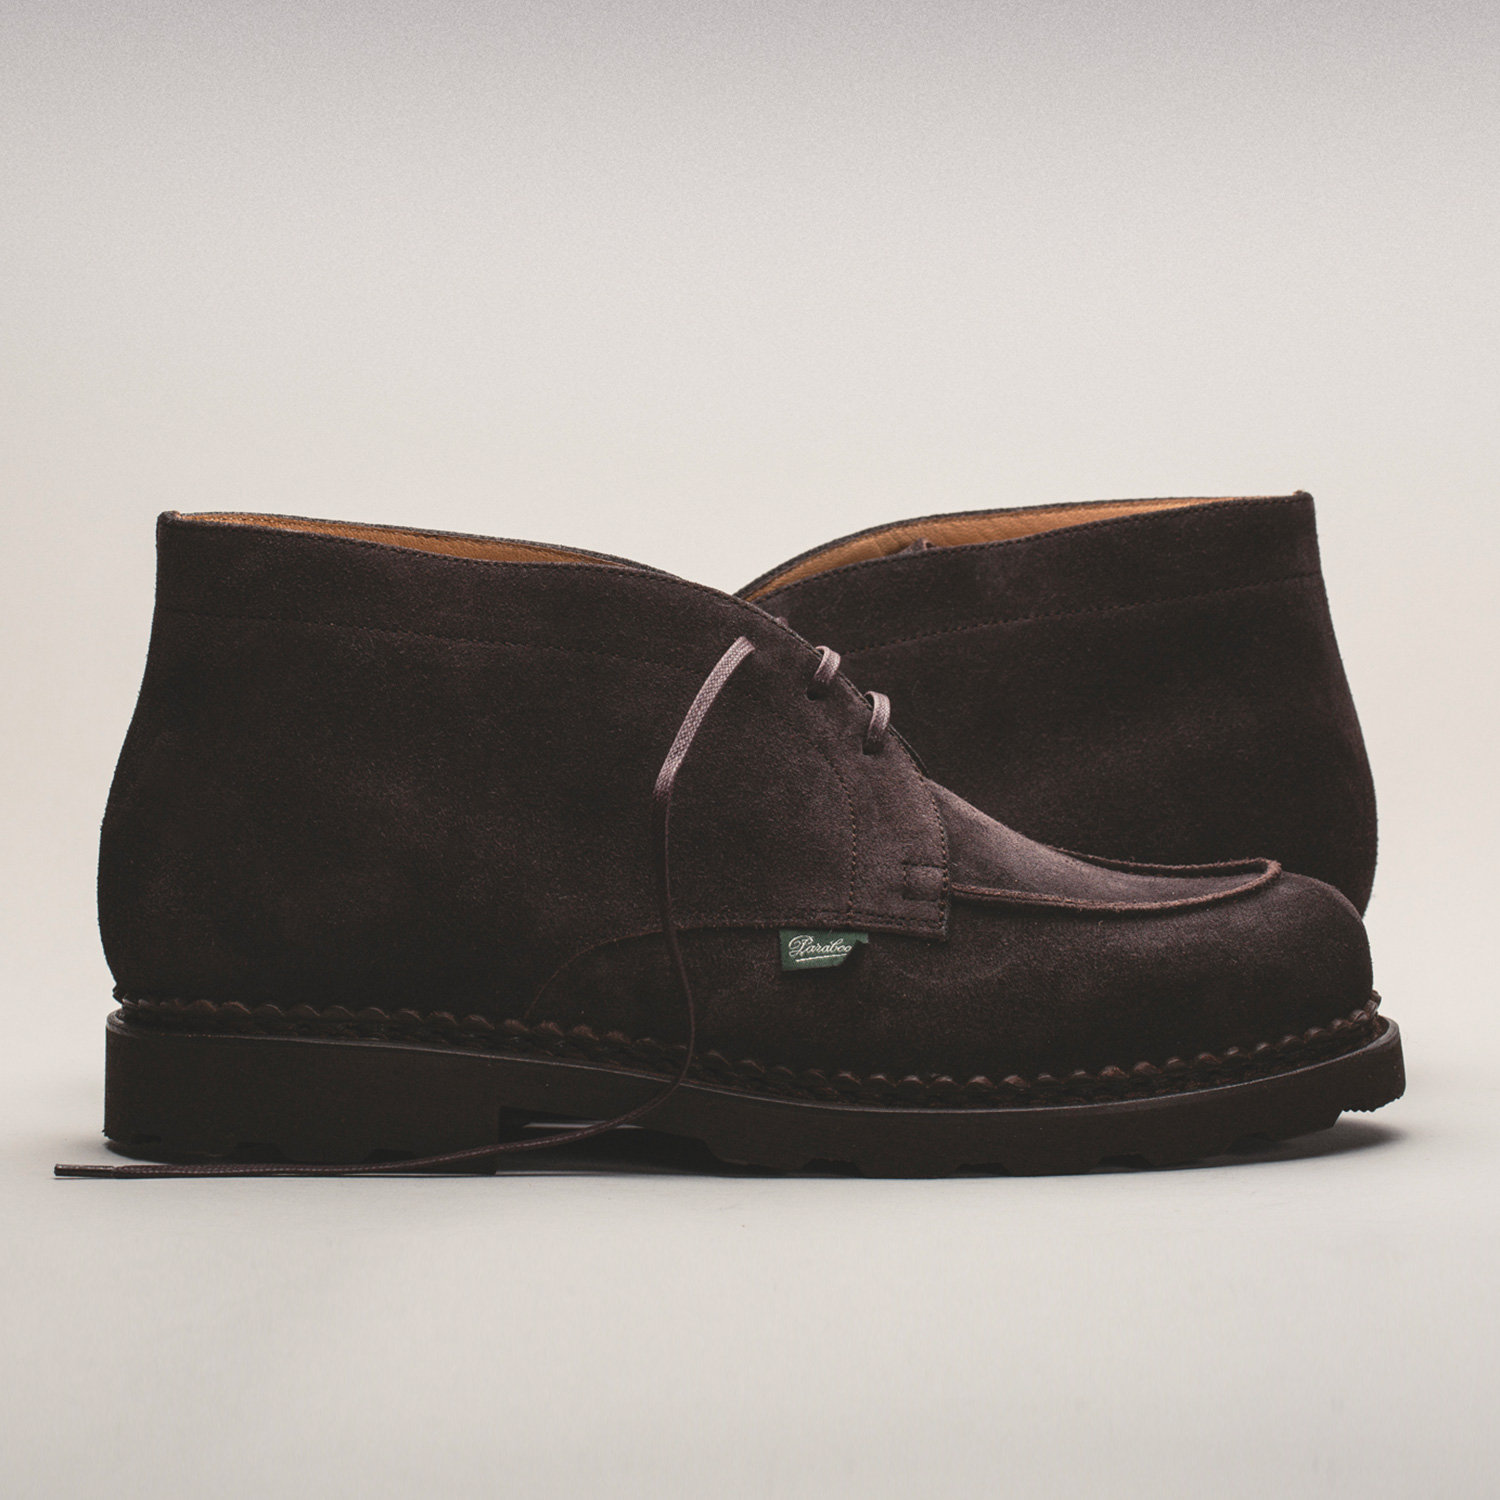 CHUKKA shoes in Chocolate color by Arpenteur